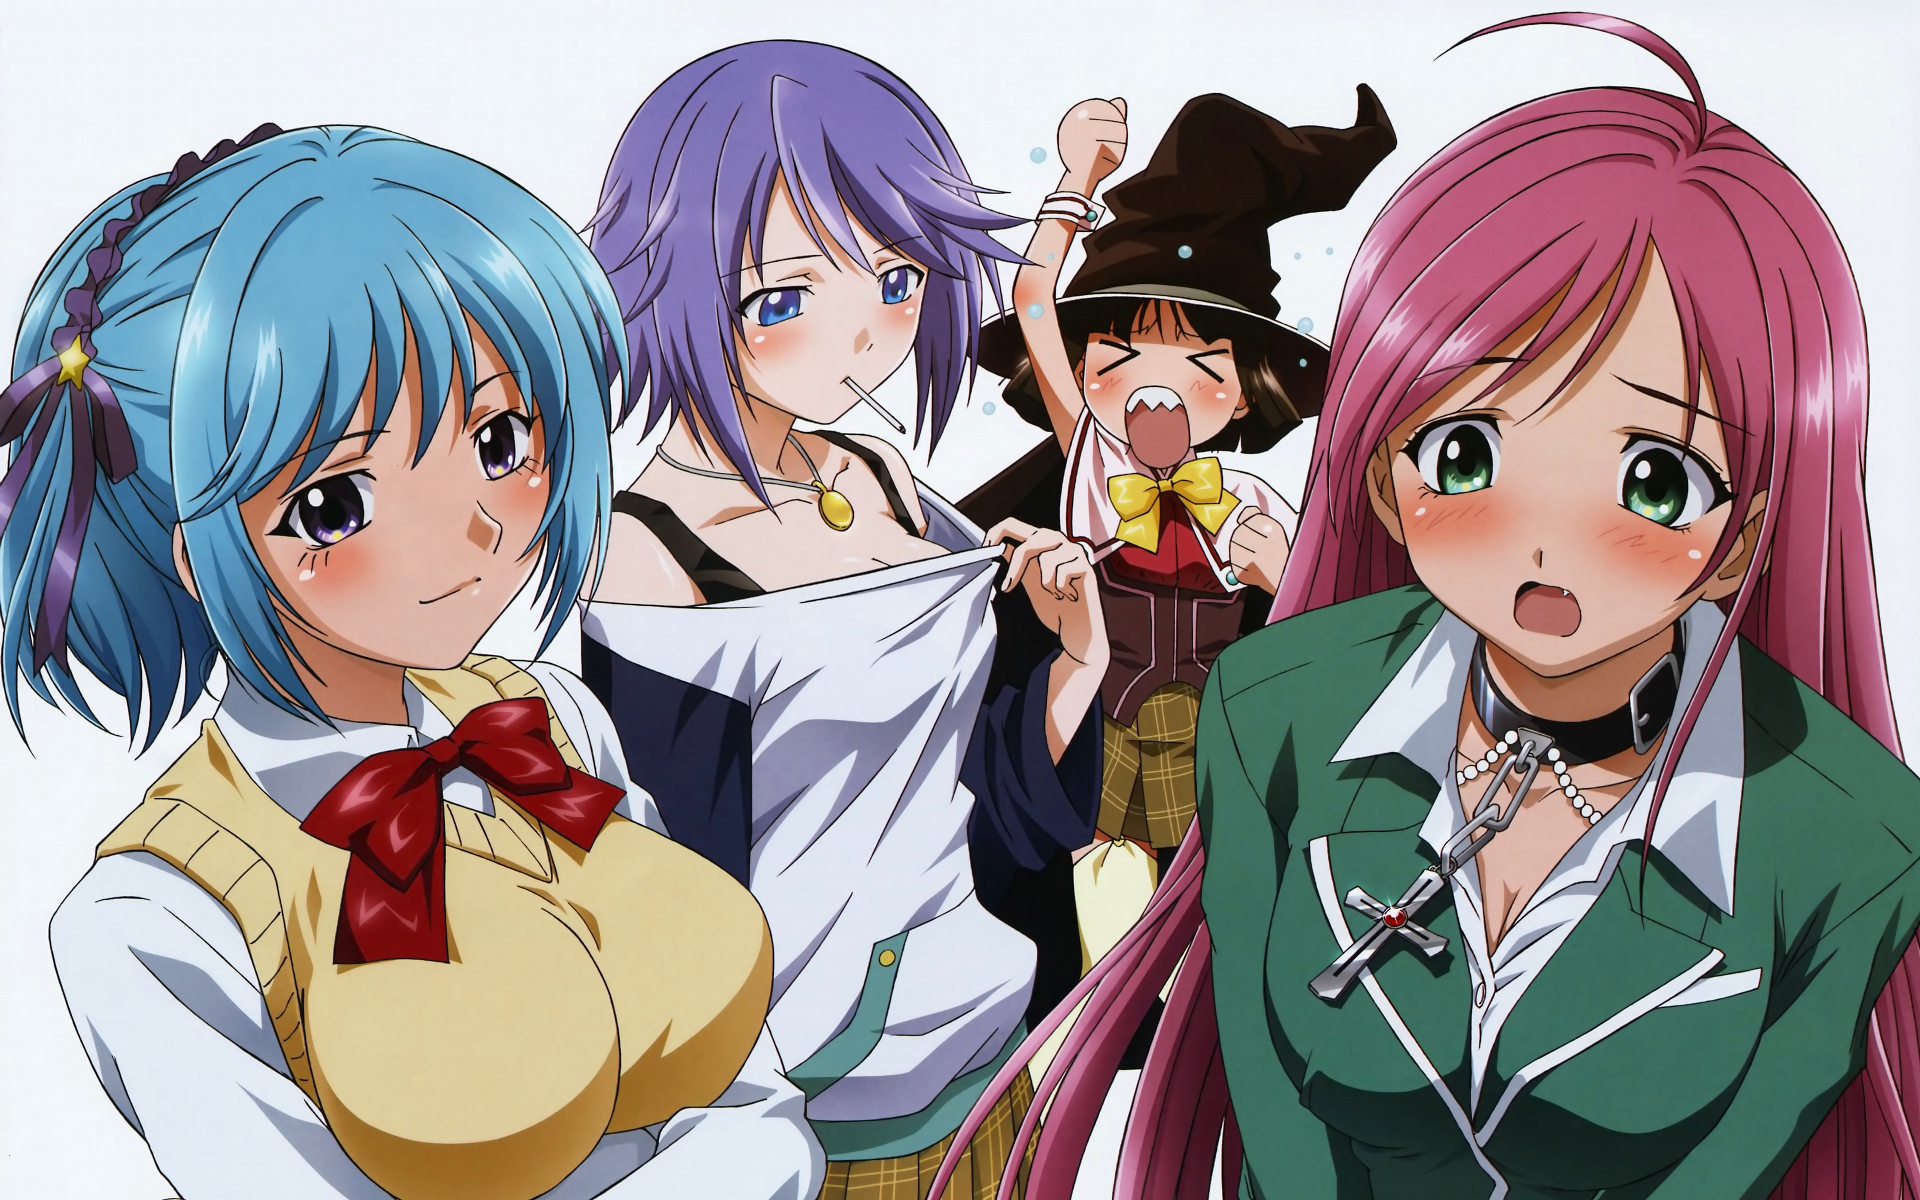 Rosario + Vampire anime artwork featuring captivating characters.